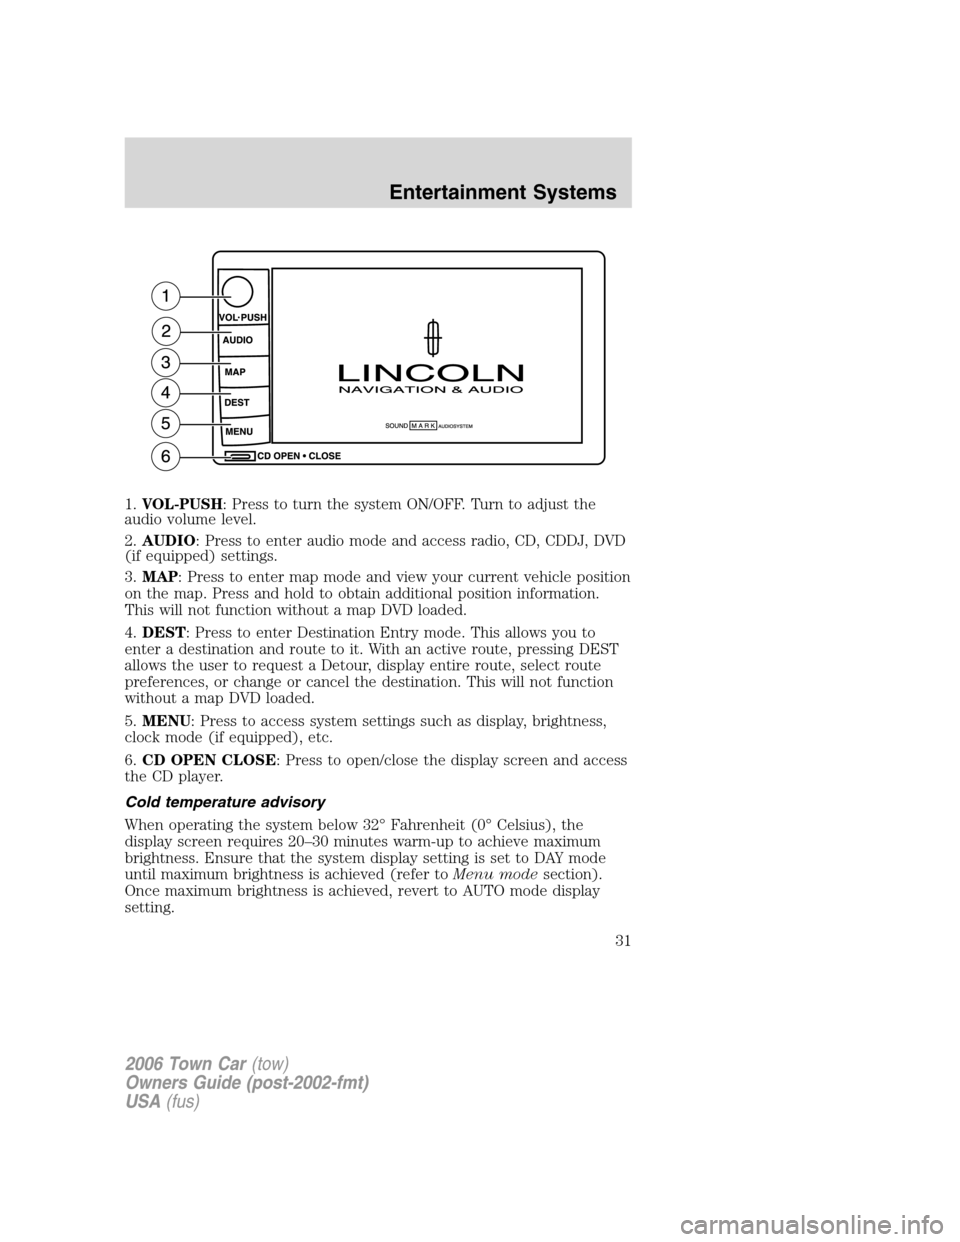 LINCOLN TOWN CAR 2006  Owners Manual 1.VOL-PUSH: Press to turn the system ON/OFF. Turn to adjust the
audio volume level.
2.AUDIO: Press to enter audio mode and access radio, CD, CDDJ, DVD
(if equipped) settings.
3.MAP: Press to enter map